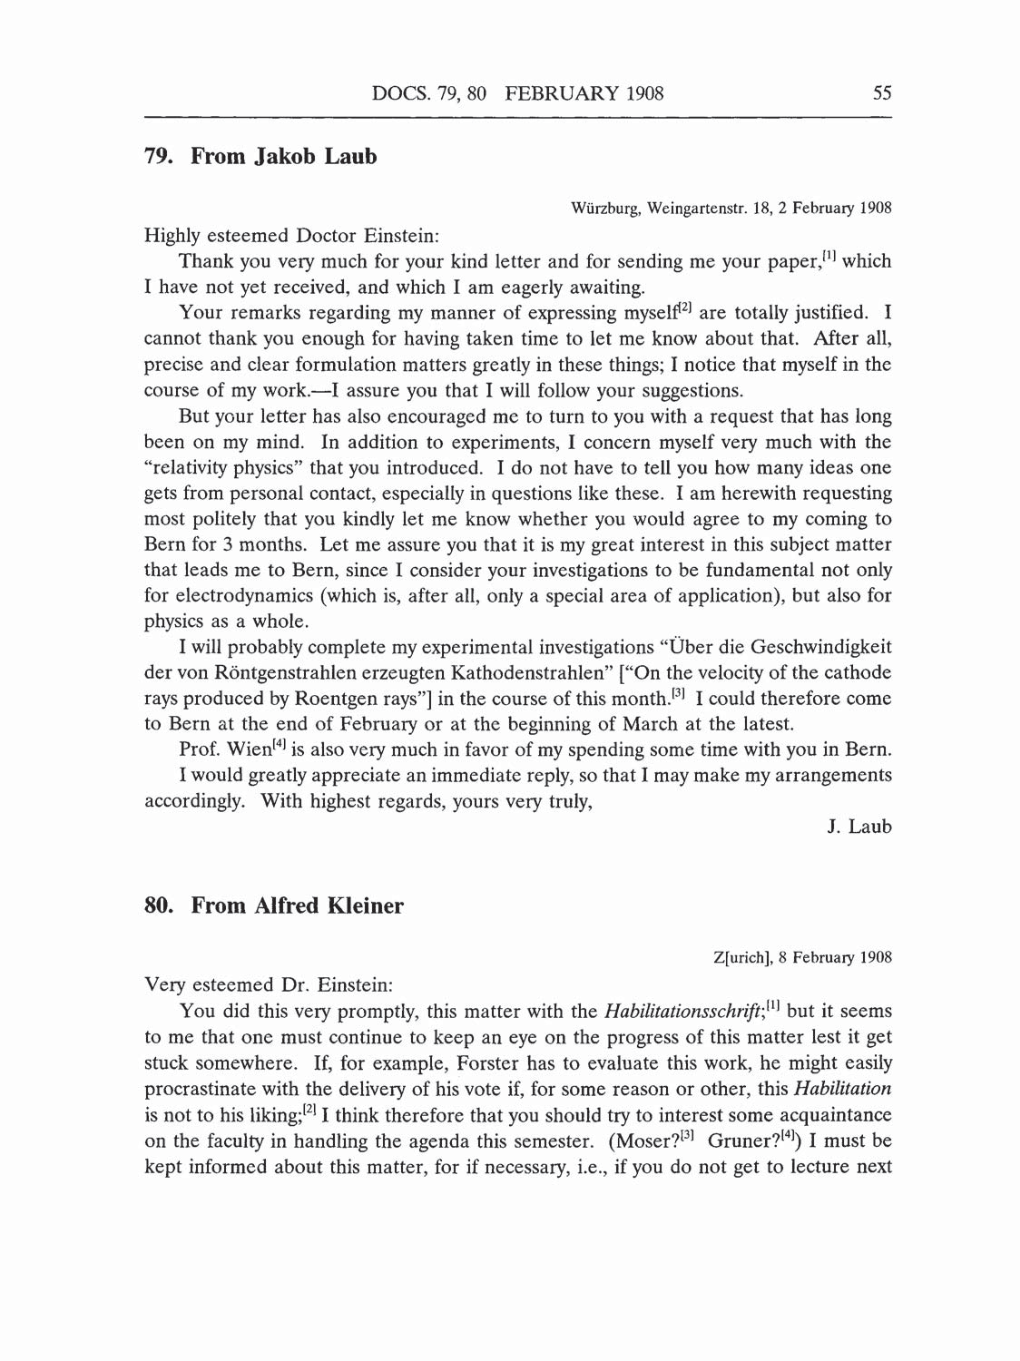 Volume 5: The Swiss Years: Correspondence, 1902-1914 (English translation supplement) page 55